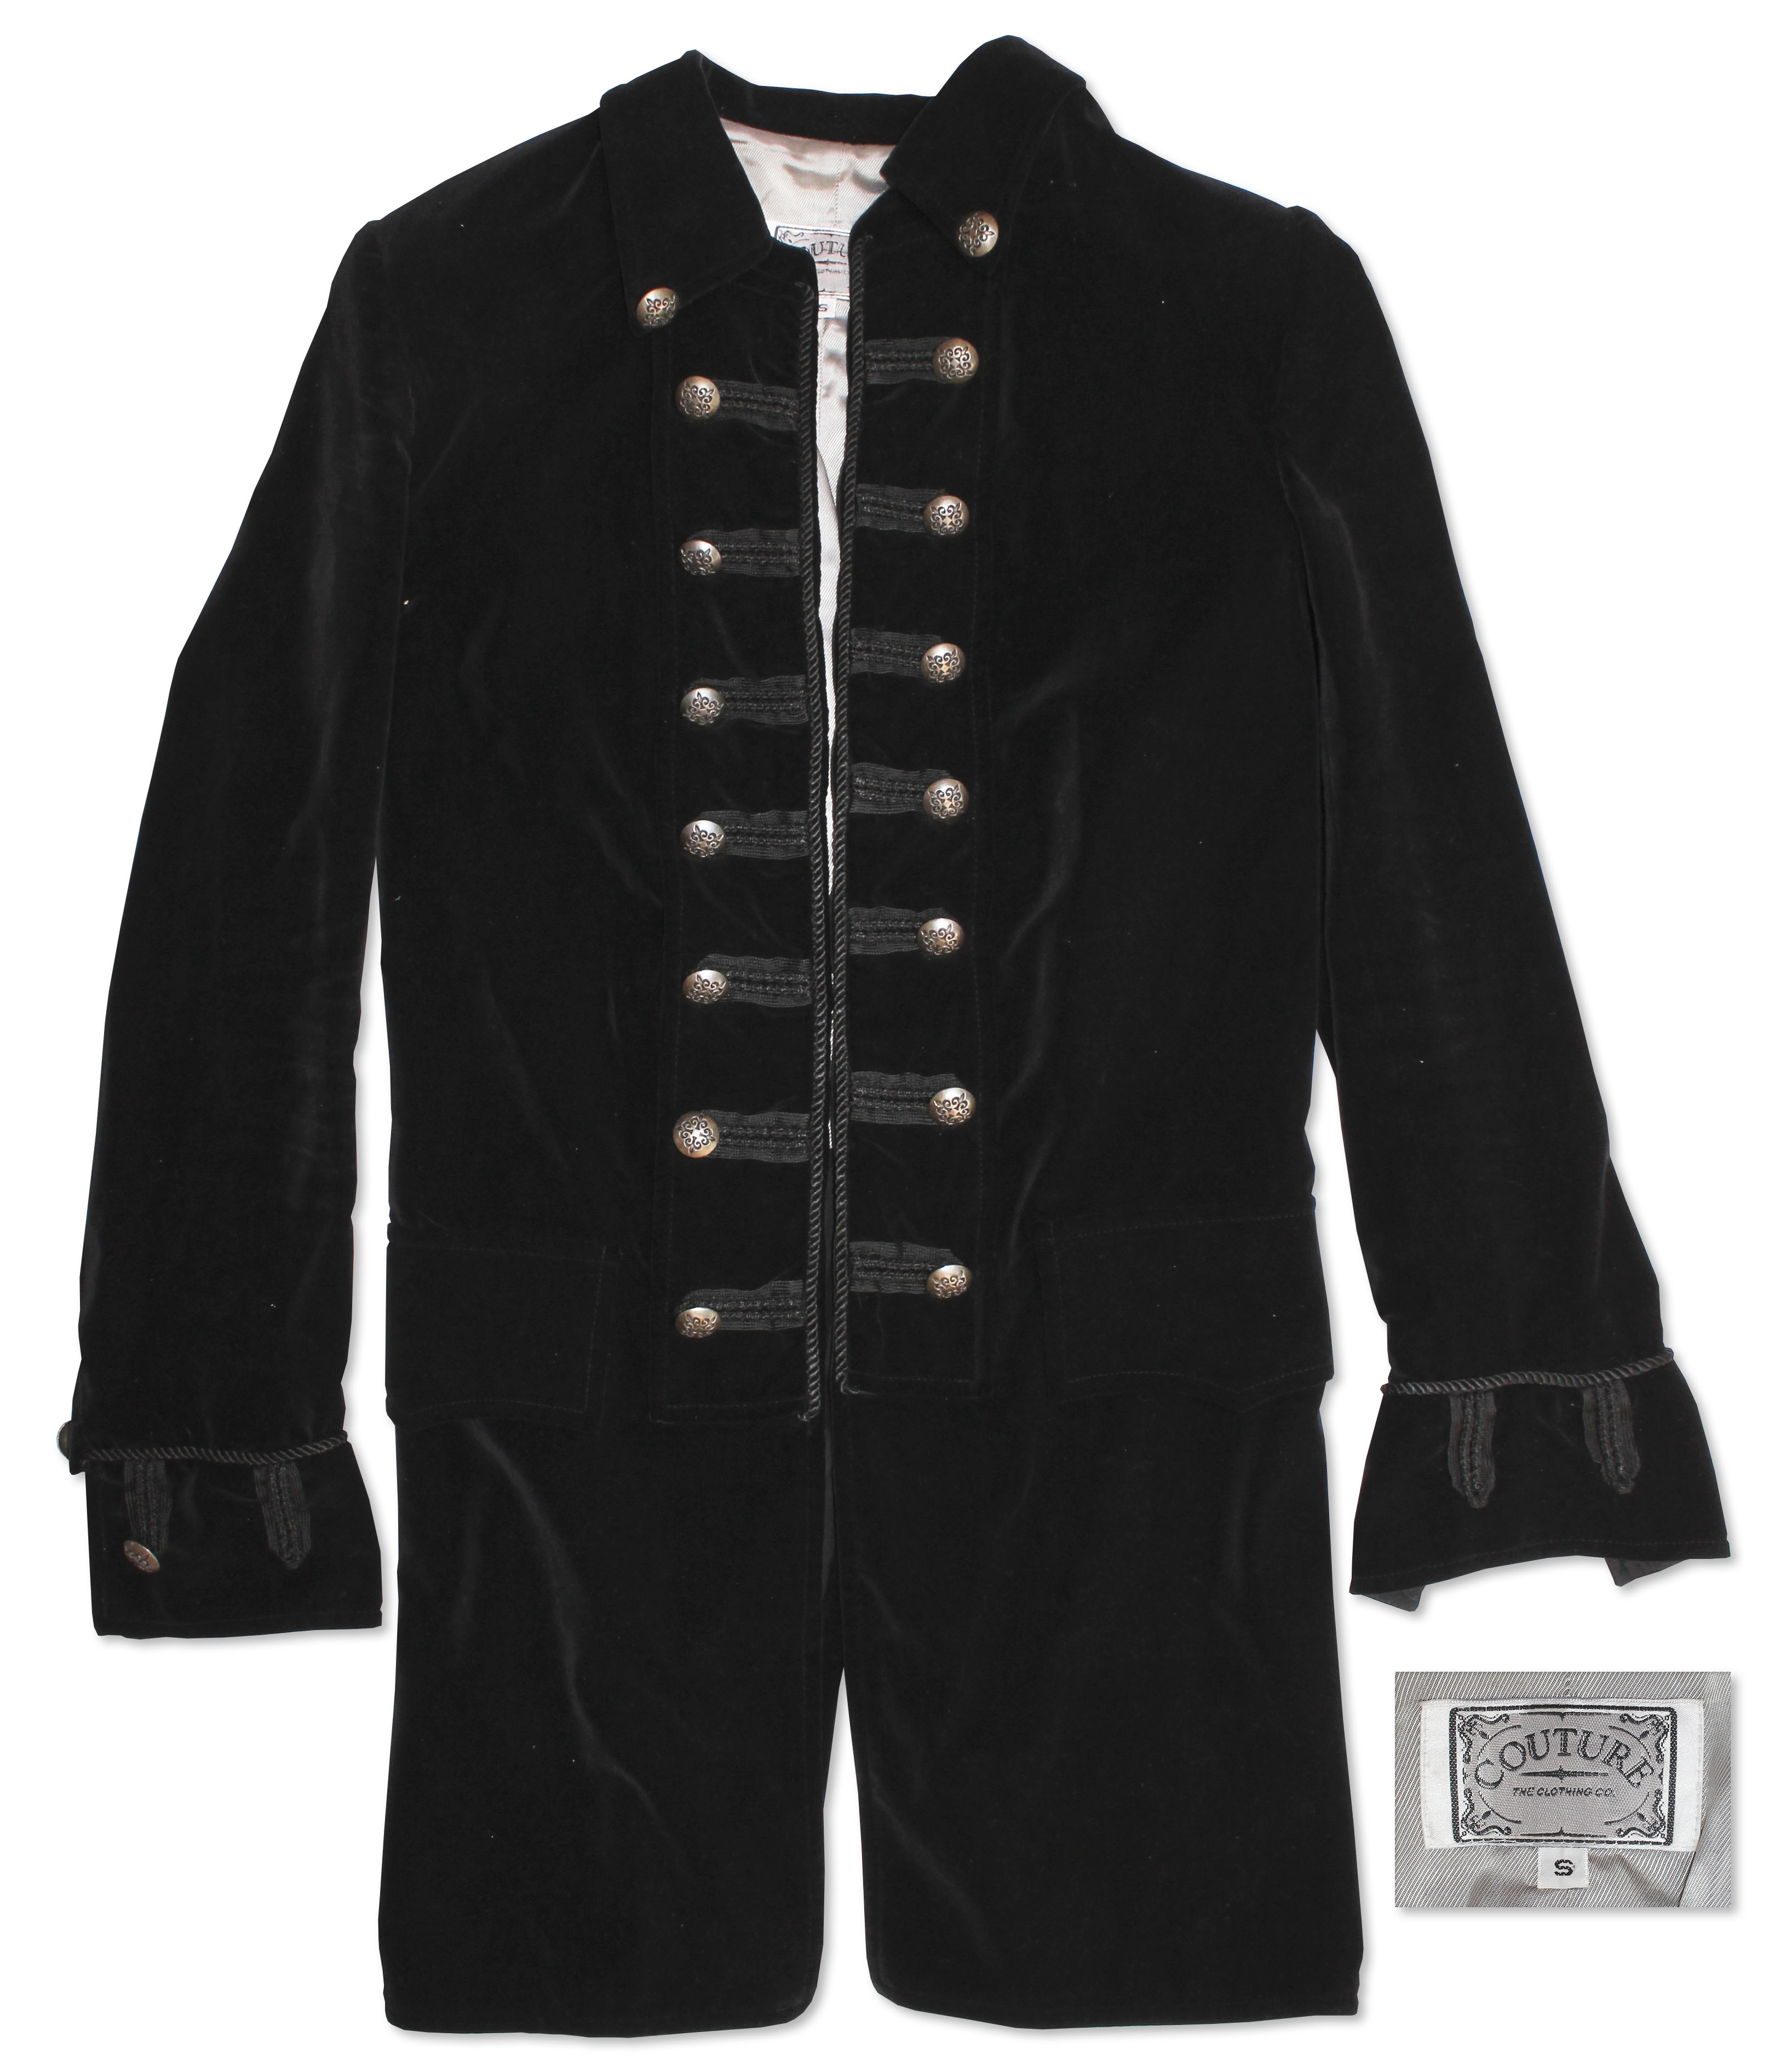 Prince worn jacket Prince Memorabilia Auction Prince Worn Velvet Military Jacket -- With LOA From Prince's Fashion Collaborator